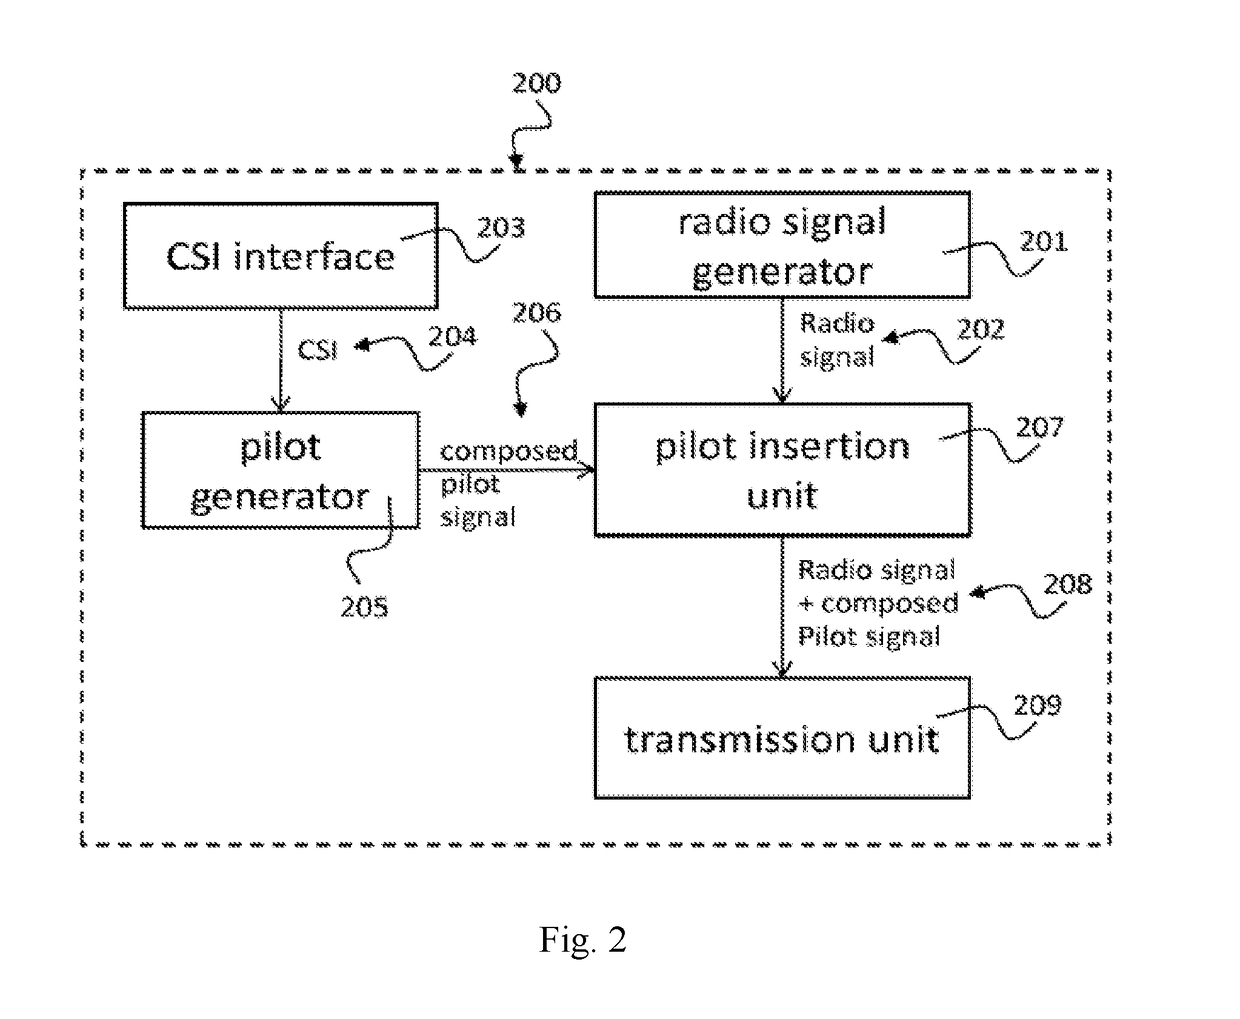 Transmission and reception devices processing composed pilot signals